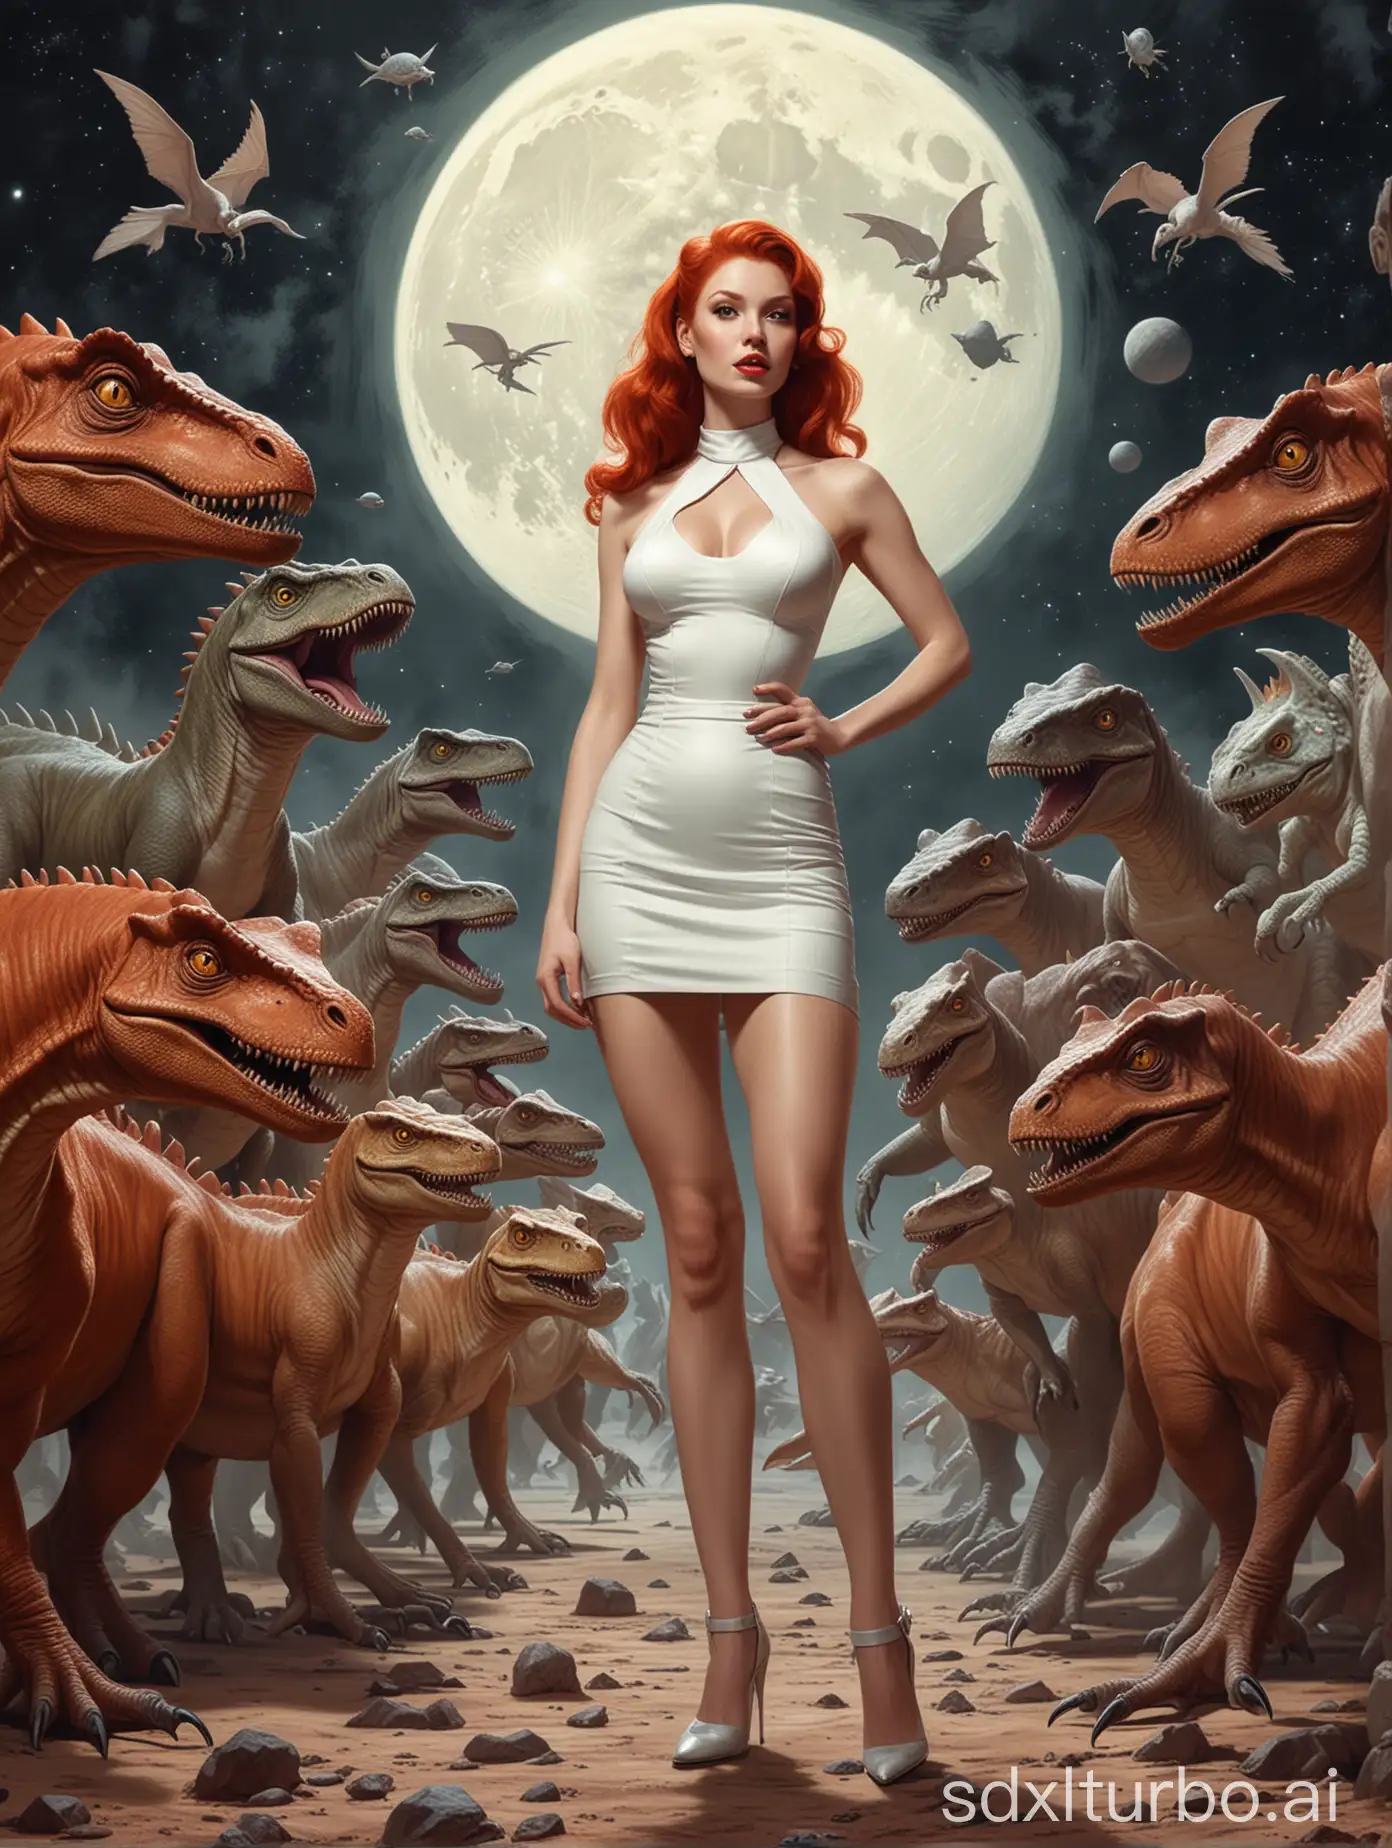 Redheaded-Woman-Leading-Dinosaurs-Dark-Pinup-Art-on-the-Moon